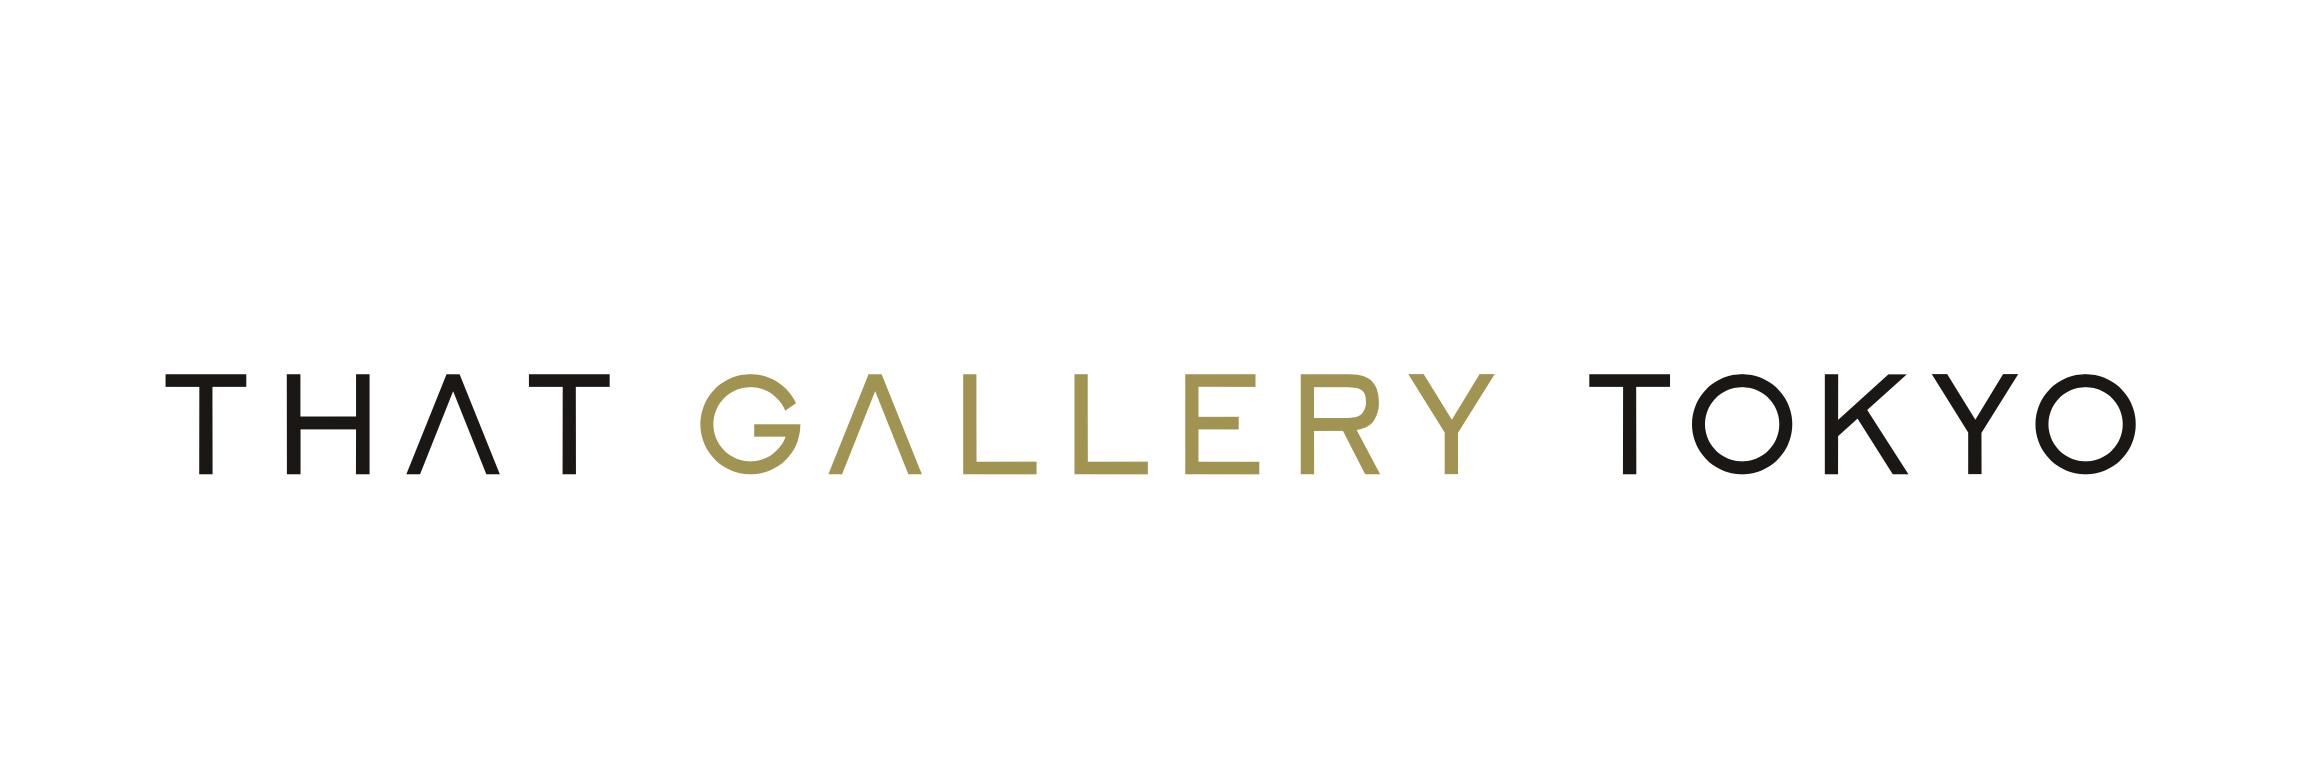 That Gallery Tokyo